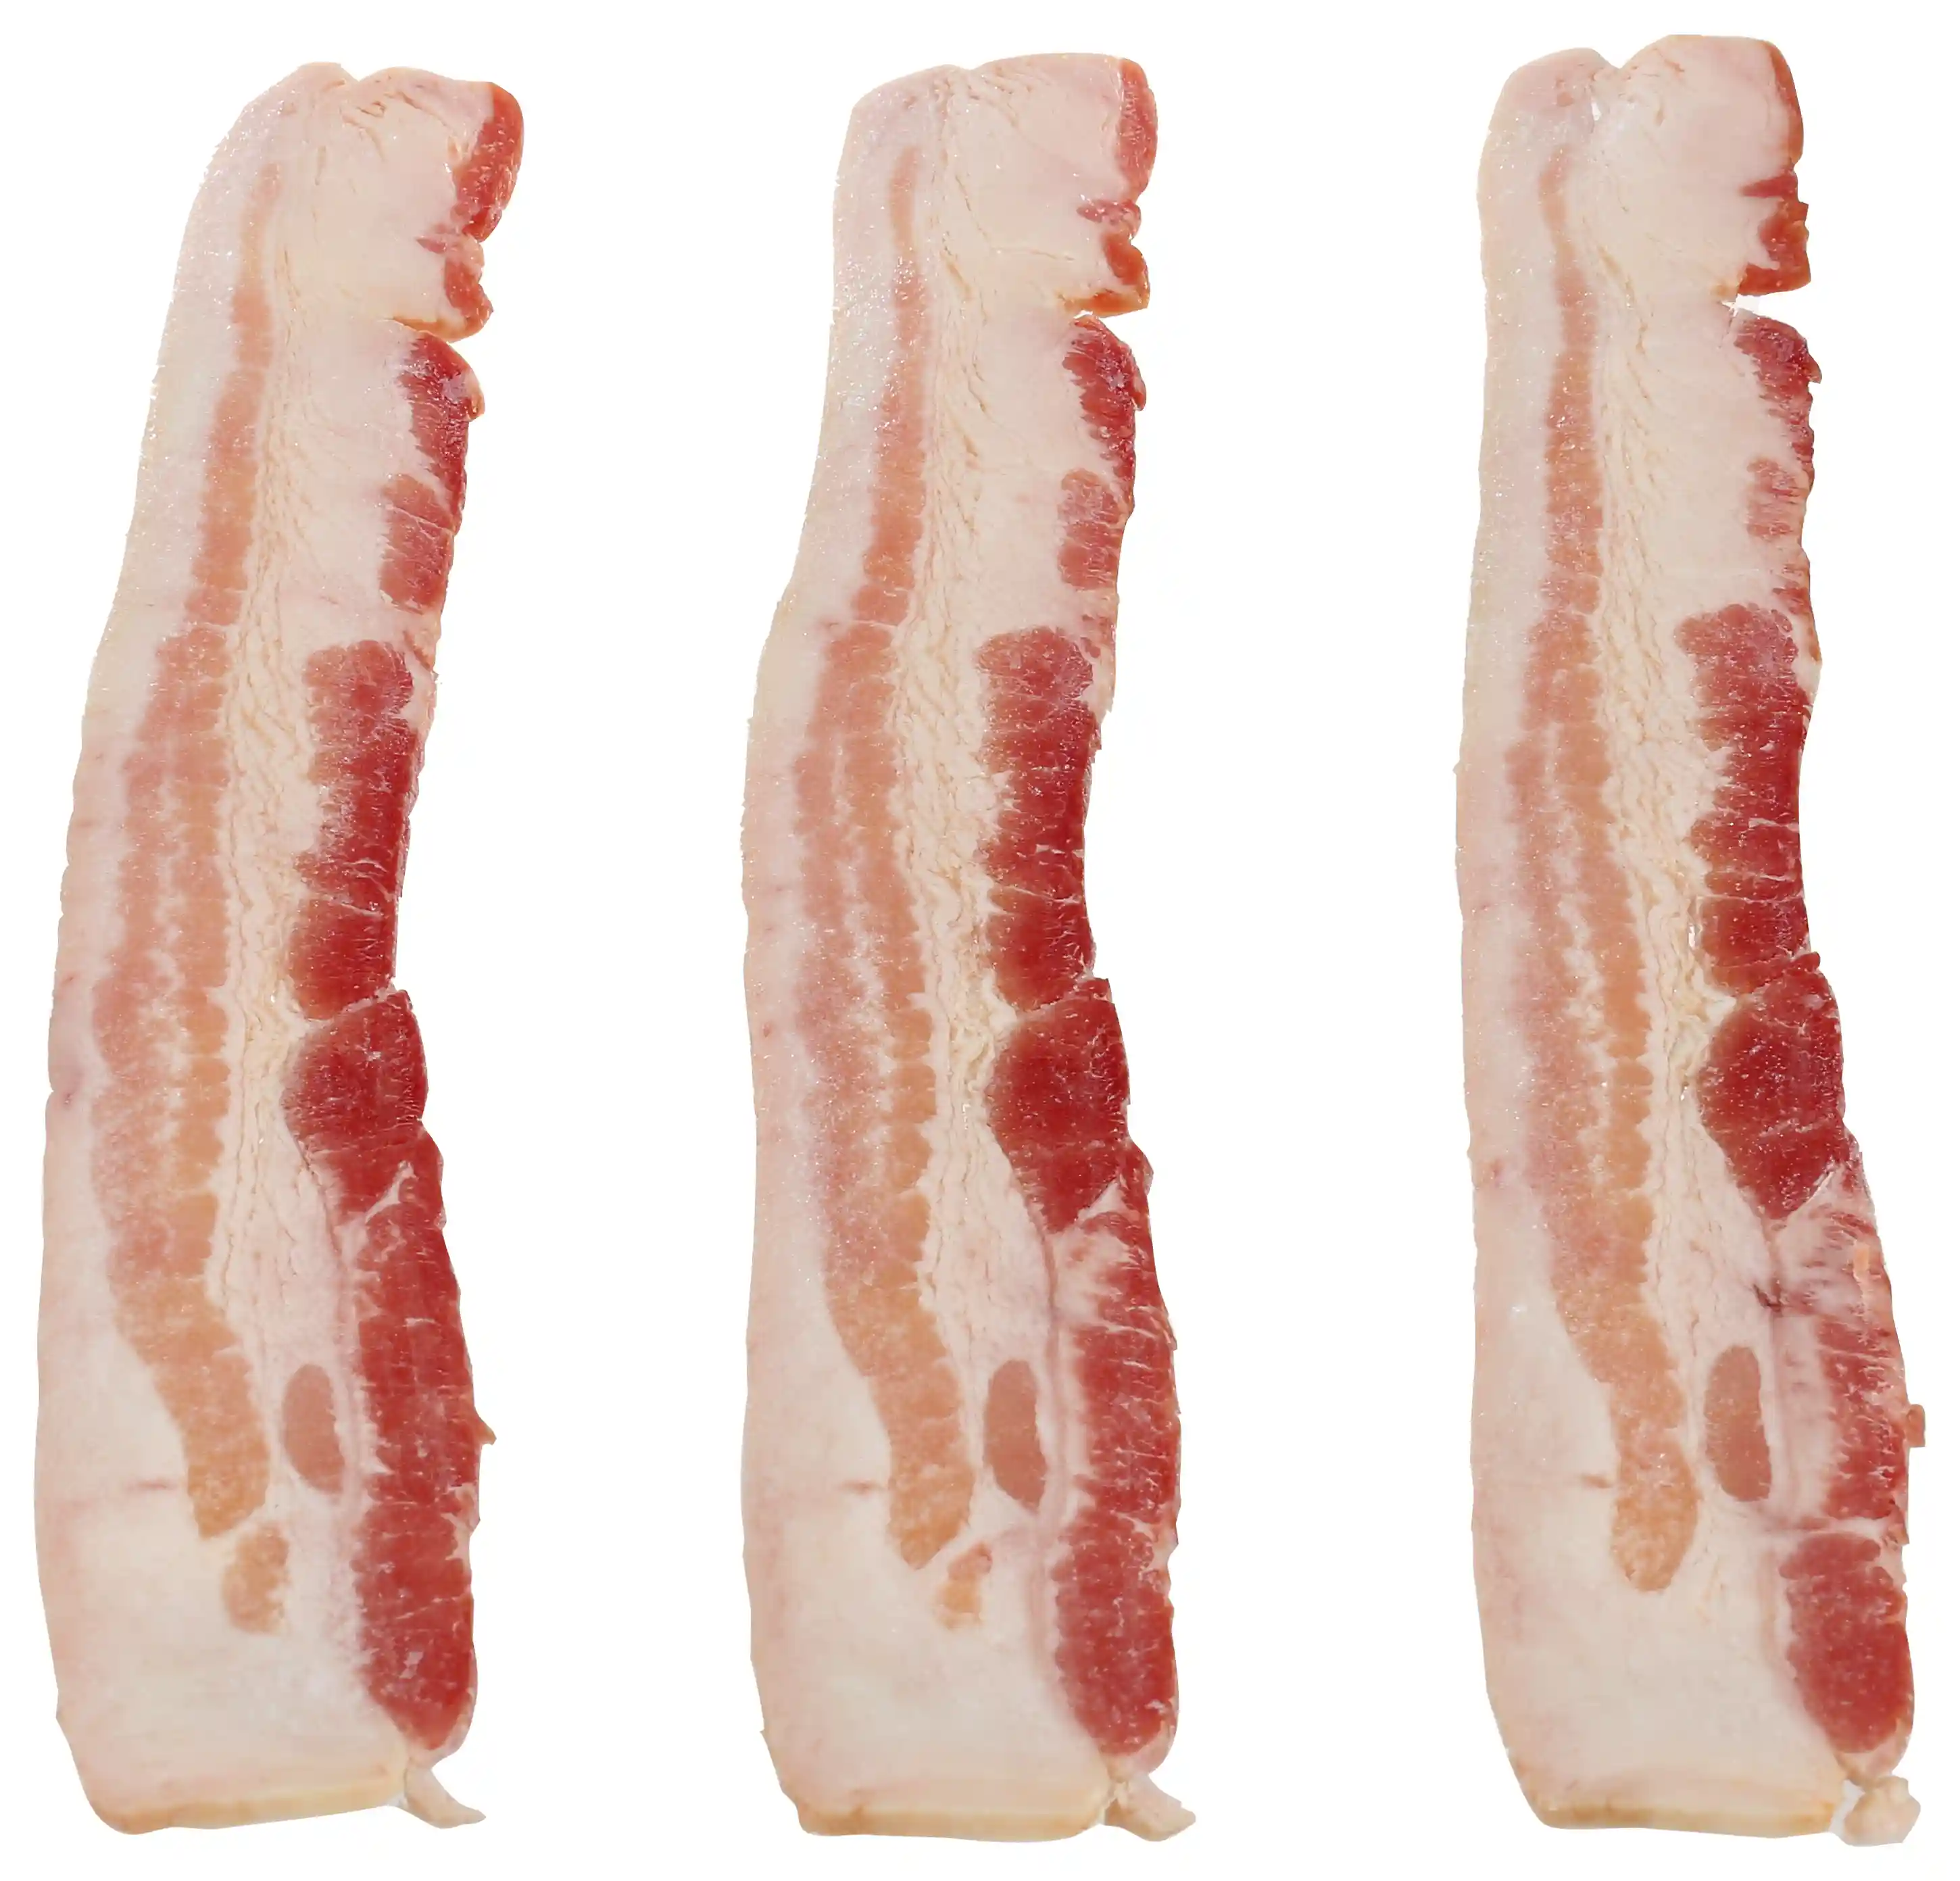 Wright® Brand Naturally Hickory Smoked Thin Sliced Bacon, Flat Pack, 15Lbs, 18-22 Slices per Pound, Gas Flushed_image_21